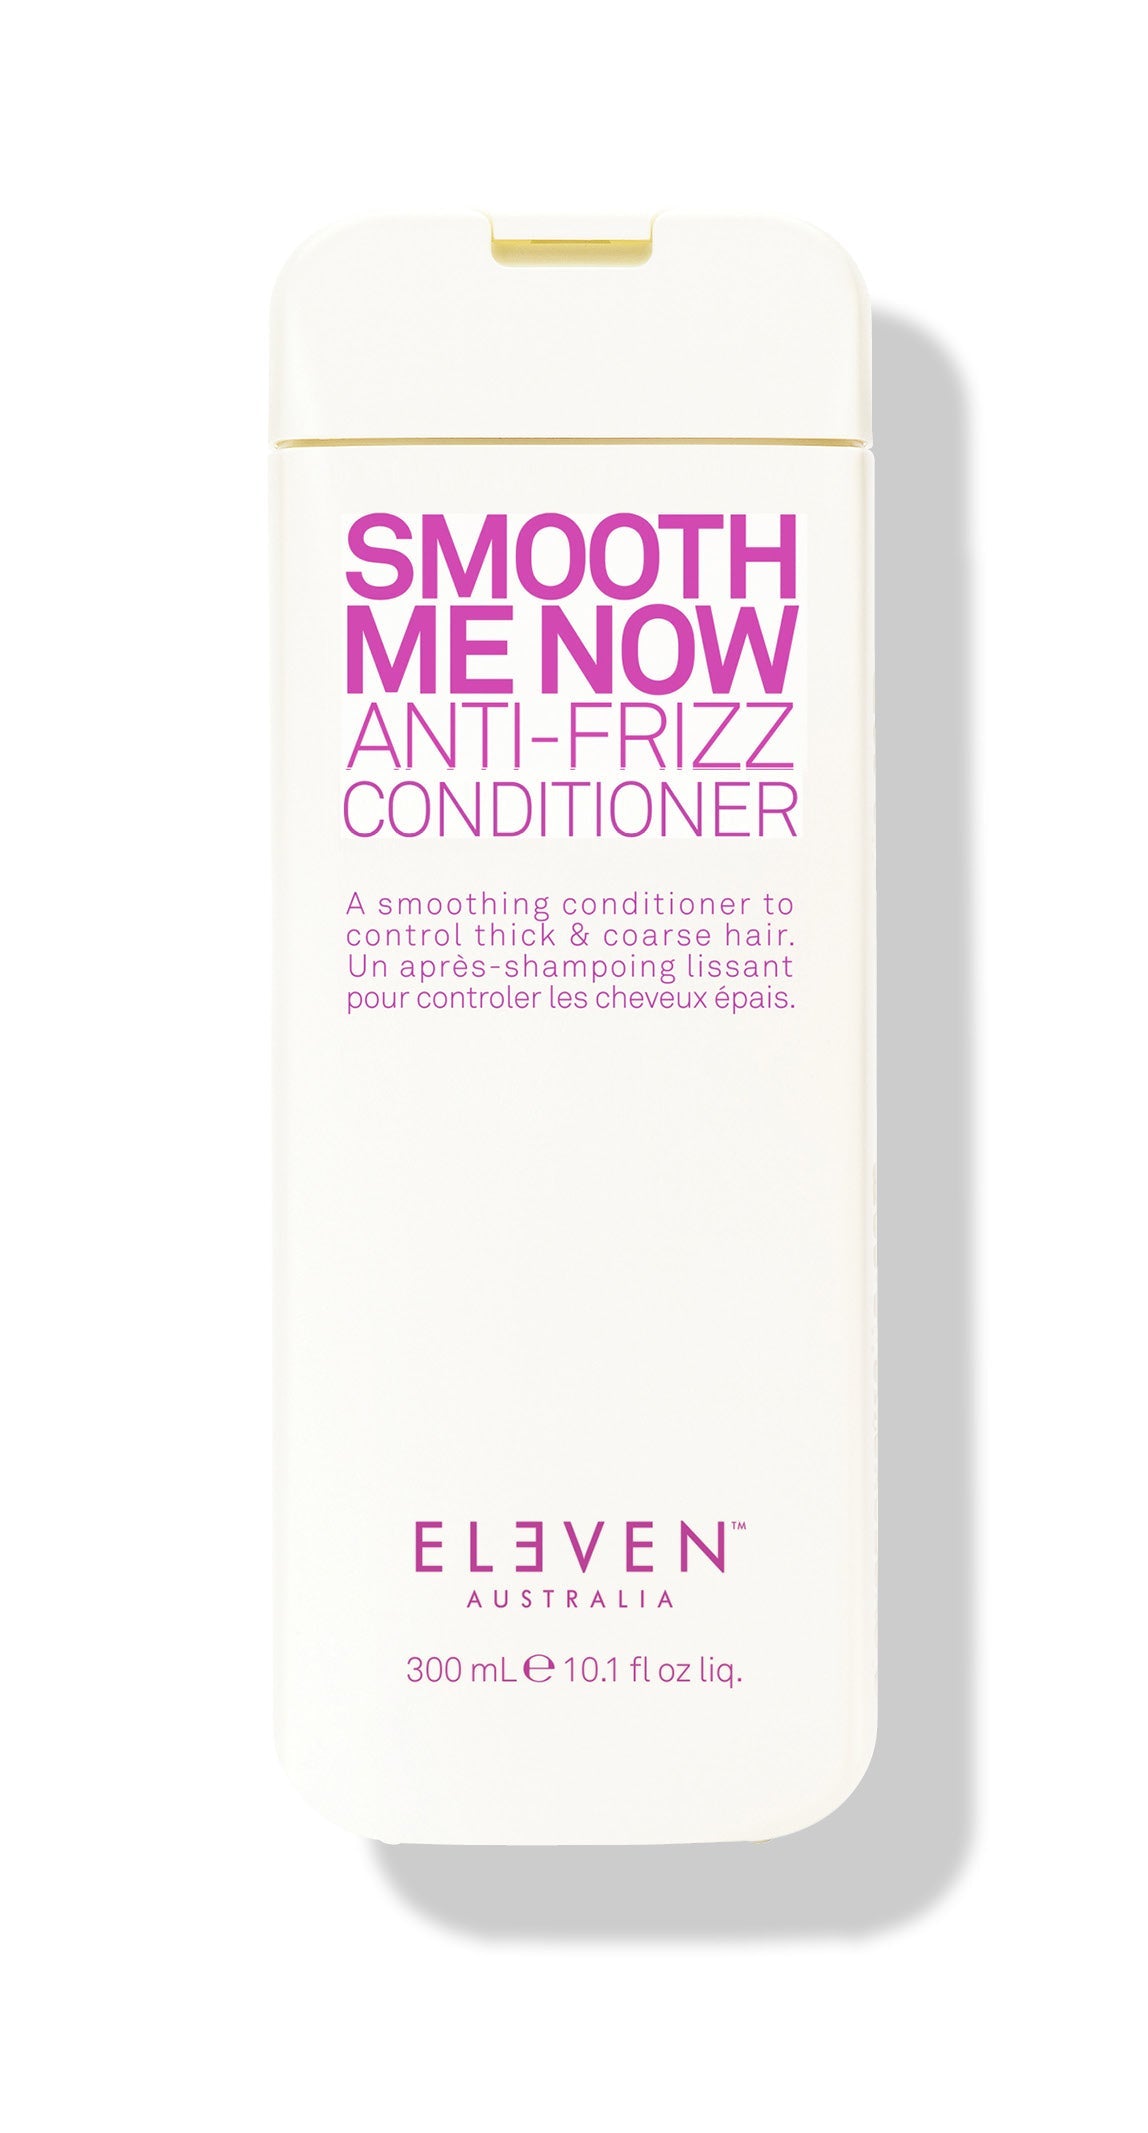 SMOOTH ME NOW ANTI-FRIZZ CONDITIONER 300ML